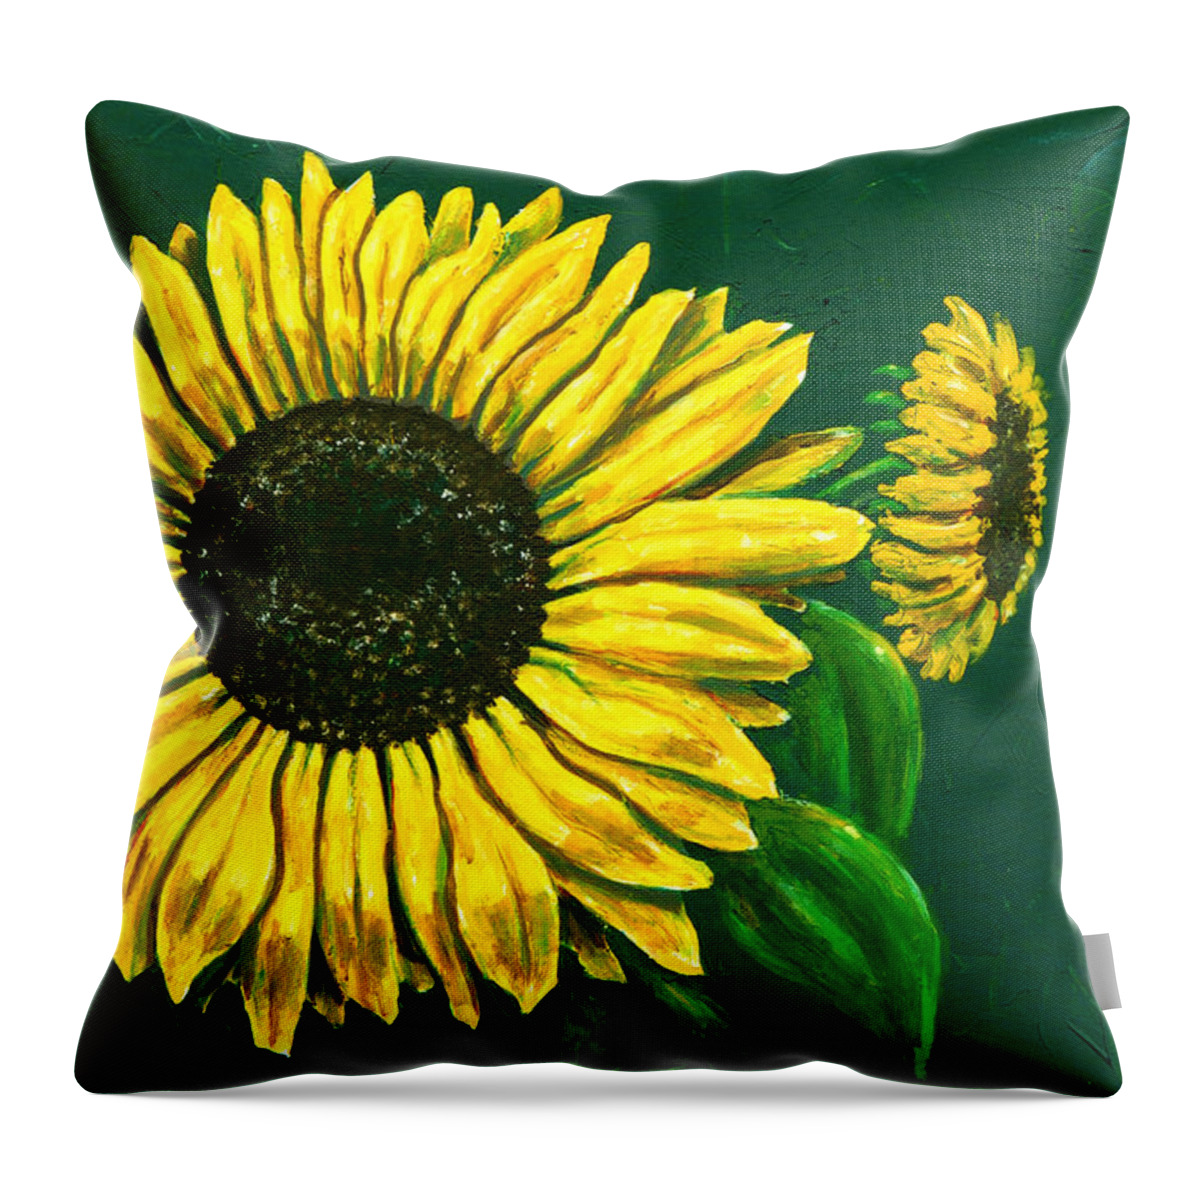 Ron Haist Throw Pillow featuring the painting Sunflower by Ron Haist